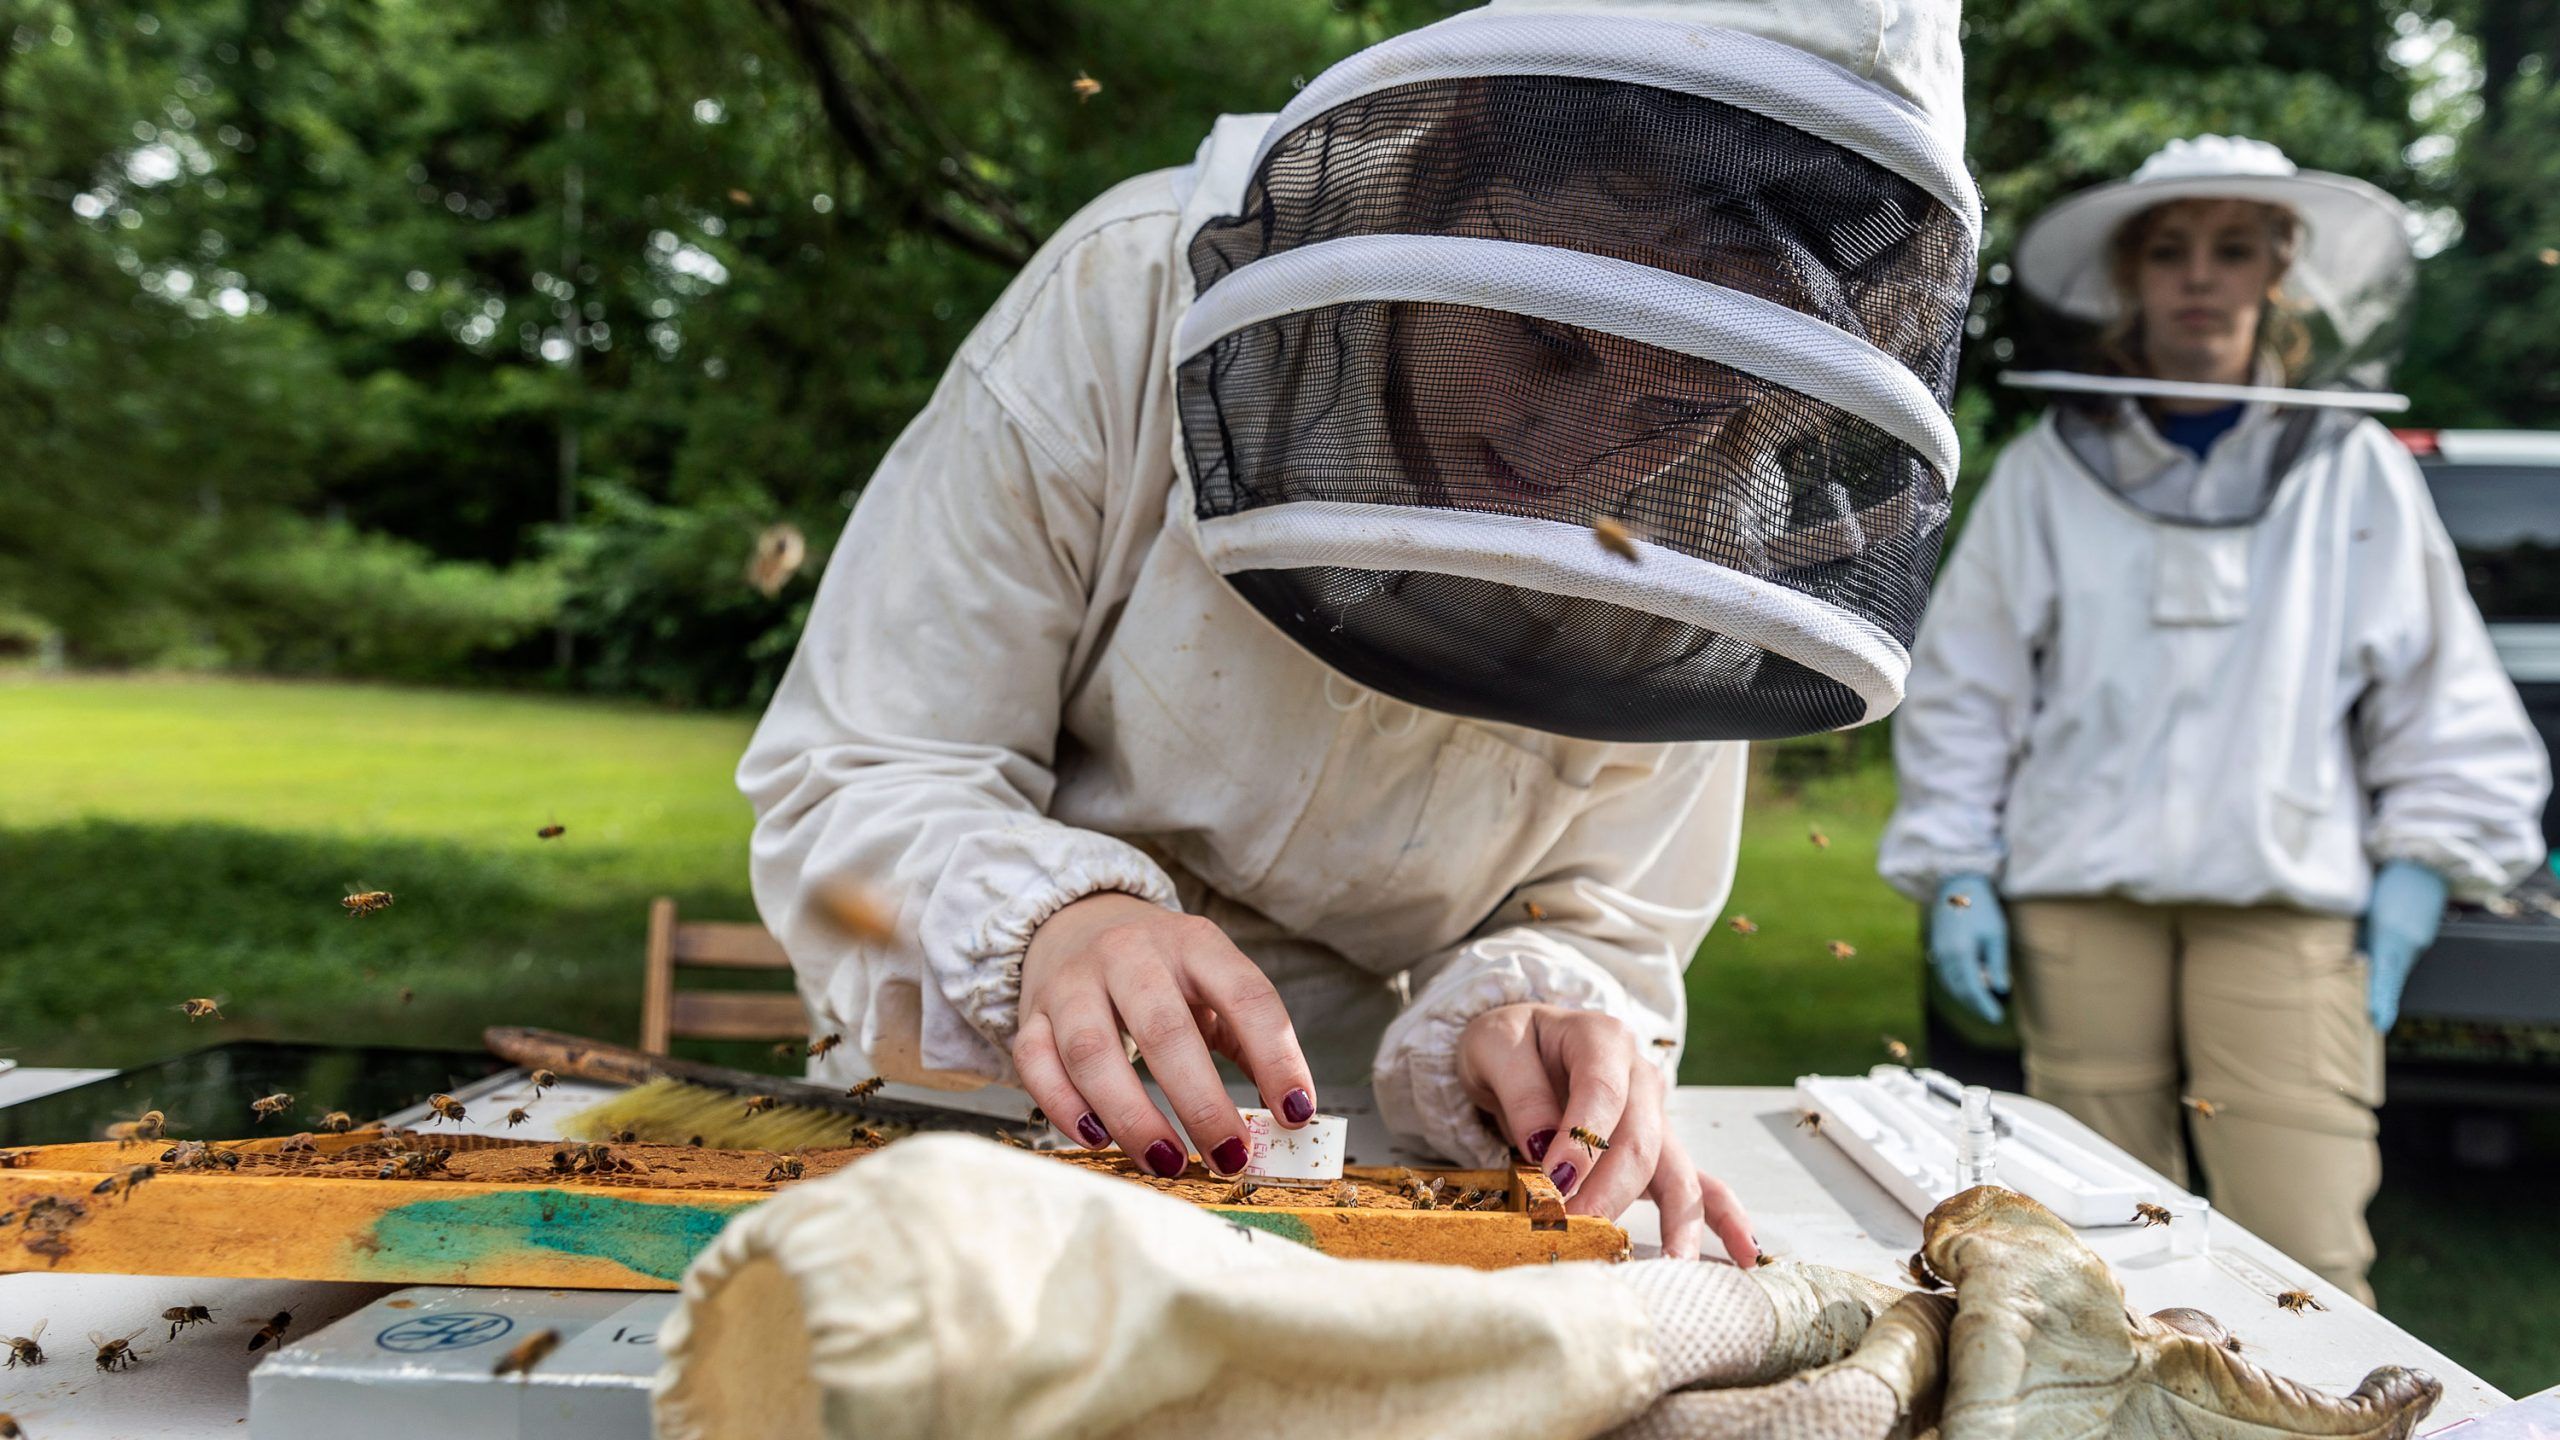 A person in beekeeping apparel examining bees on a honeycomb